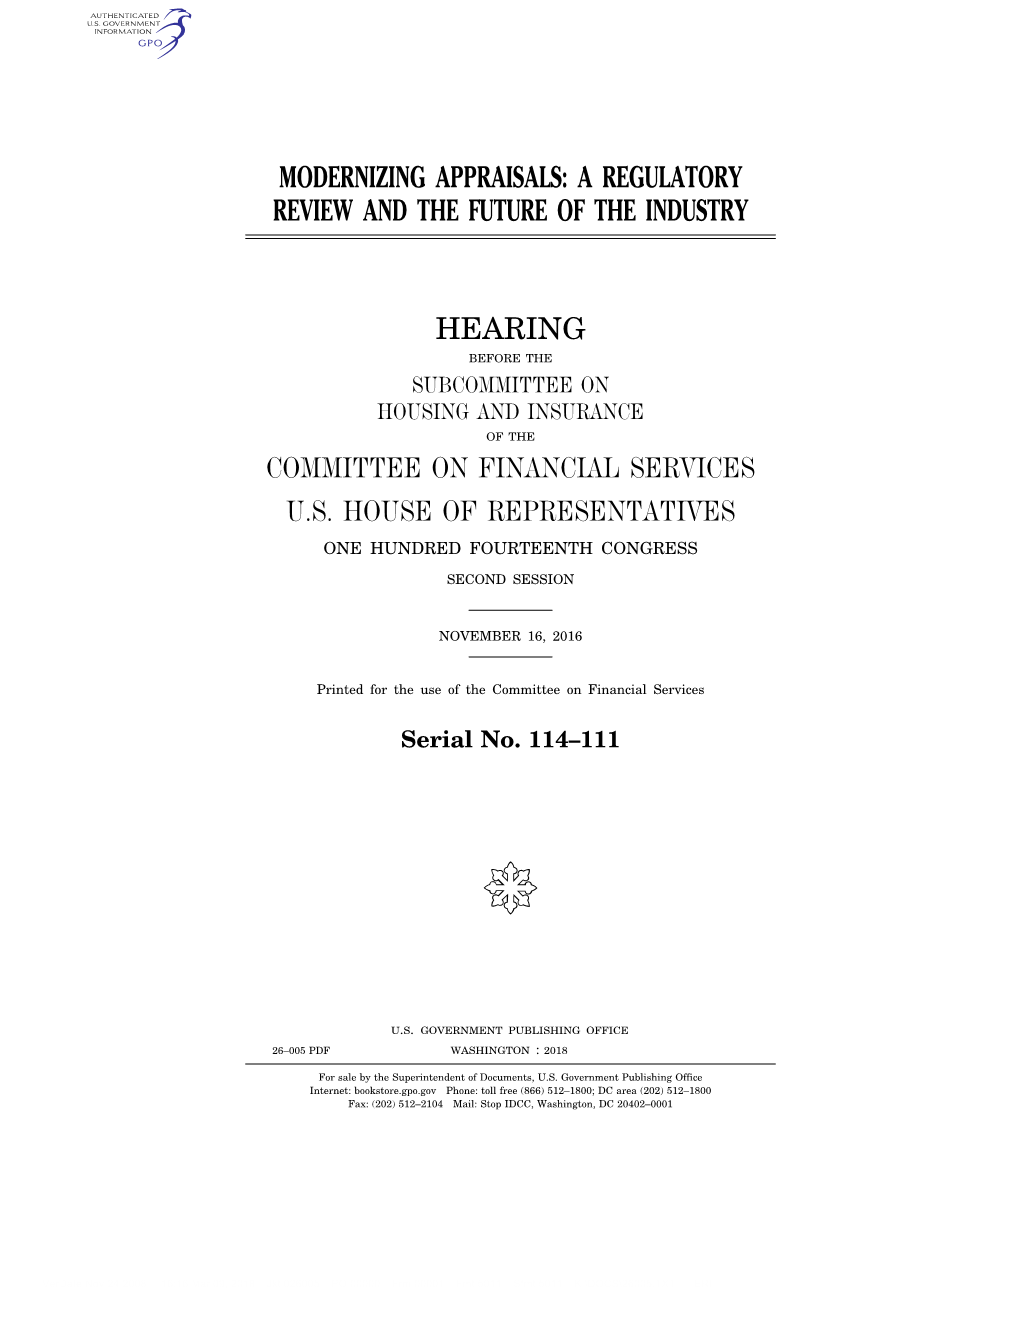 Modernizing Appraisals: a Regulatory Review and the Future of the Industry Hearing Committee on Financial Services U.S. House Of